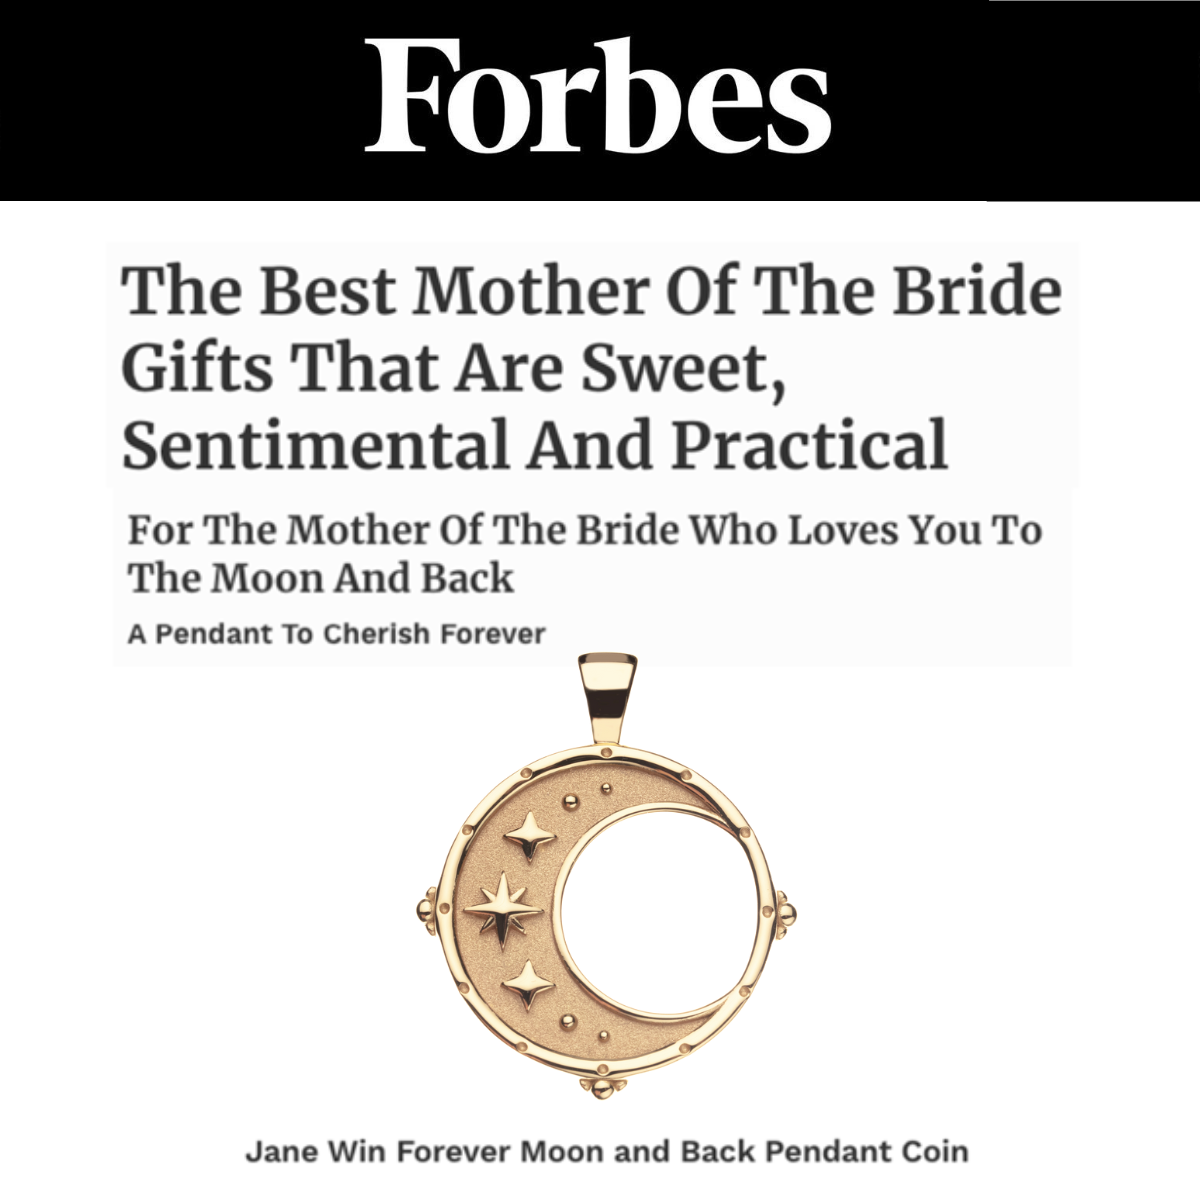 Press Highlight: Forbes - The Best Mother Of The Bride Gifts